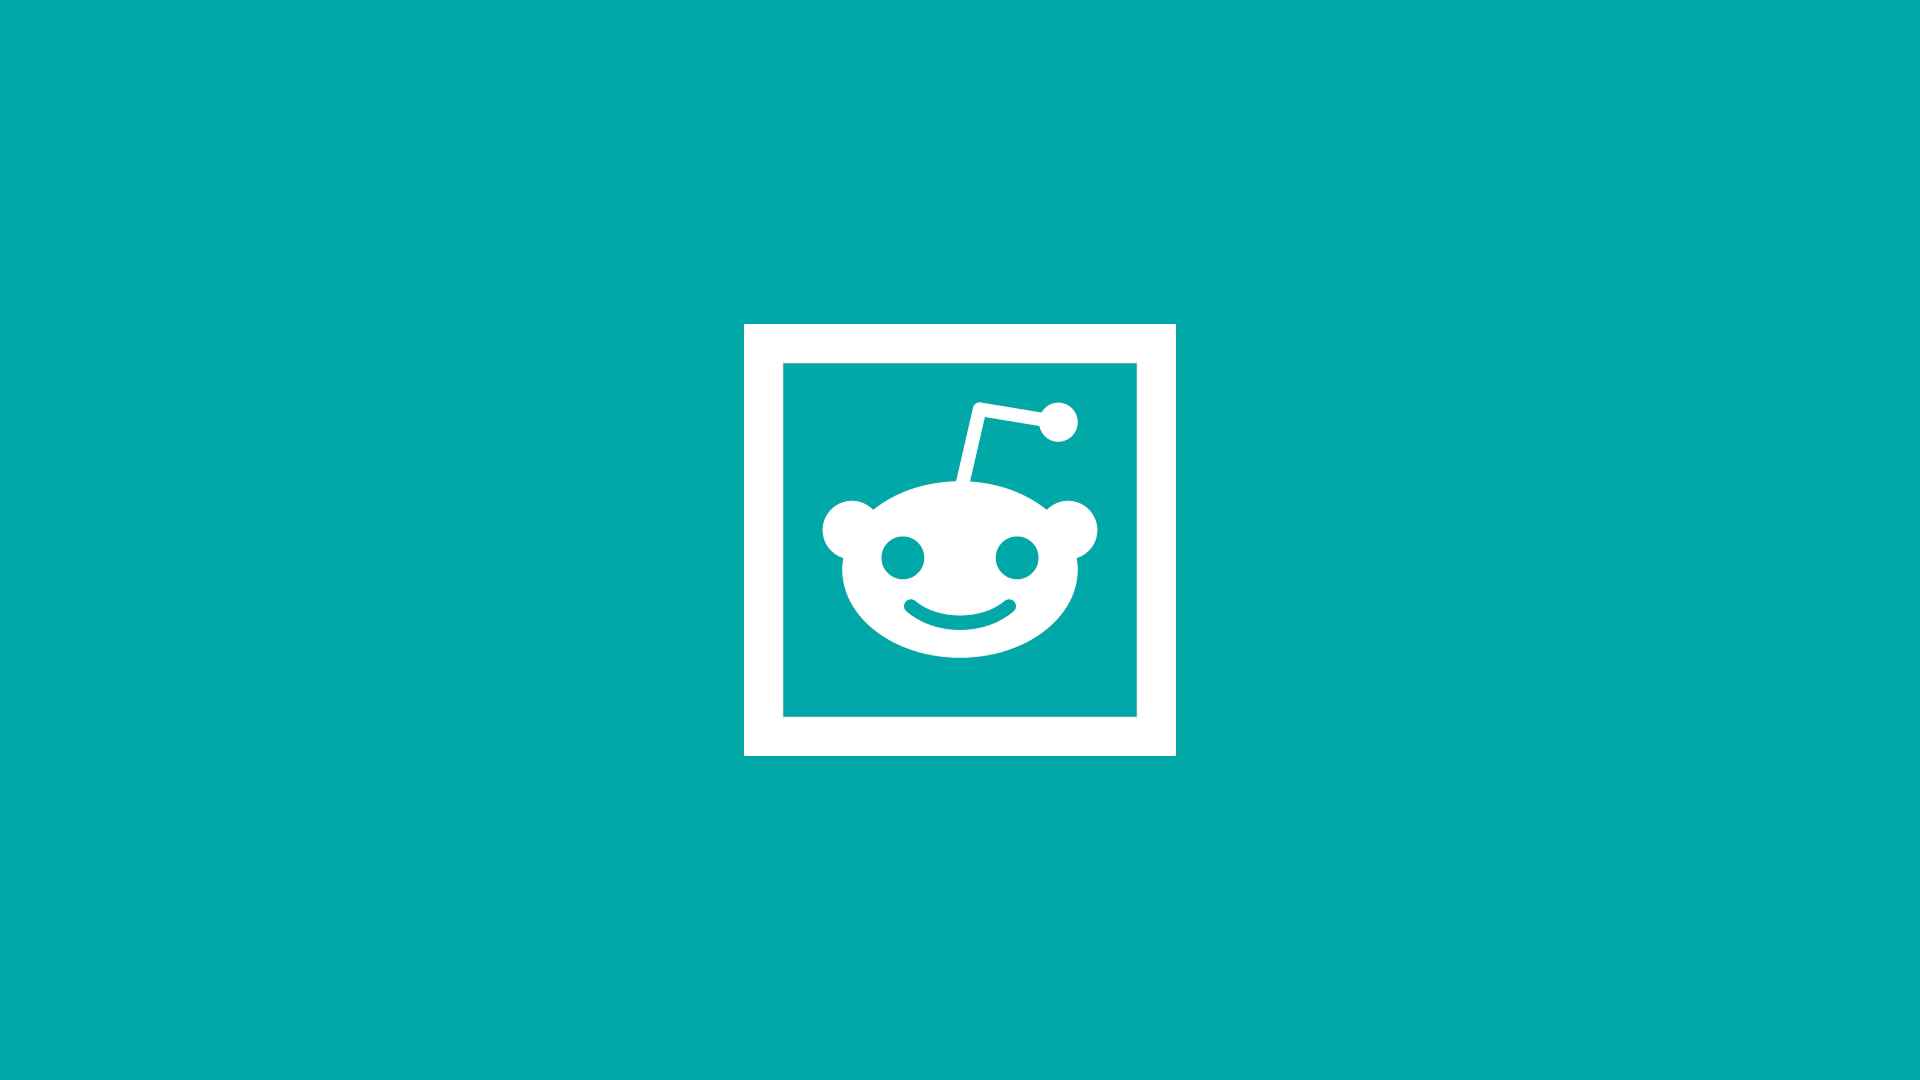 Are there any restrictions on sharing copyrighted or protected content on Reddit?